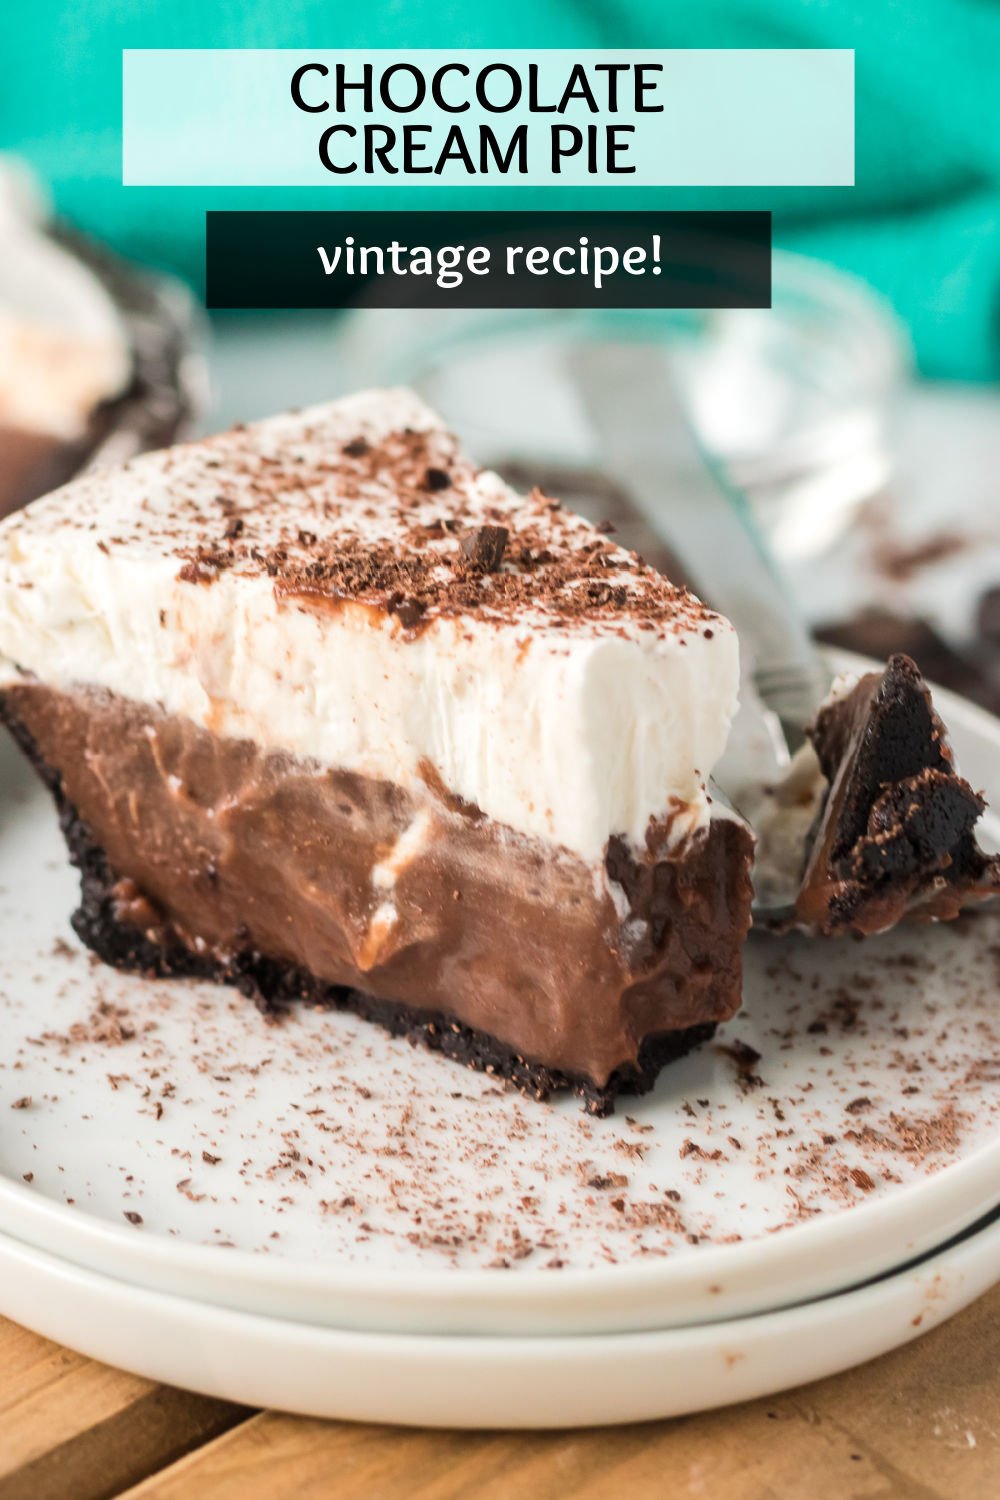 Easy Chocolate Cream Pie is a delicious, chocolatey vintage dessert sure to please the whole family! Homemade chocolate pudding topped with homemade whipped cream in an Oreo pie crust makes a cold, creamy dessert that is perfect for chocolate lovers. | www.persnicketyplates.com